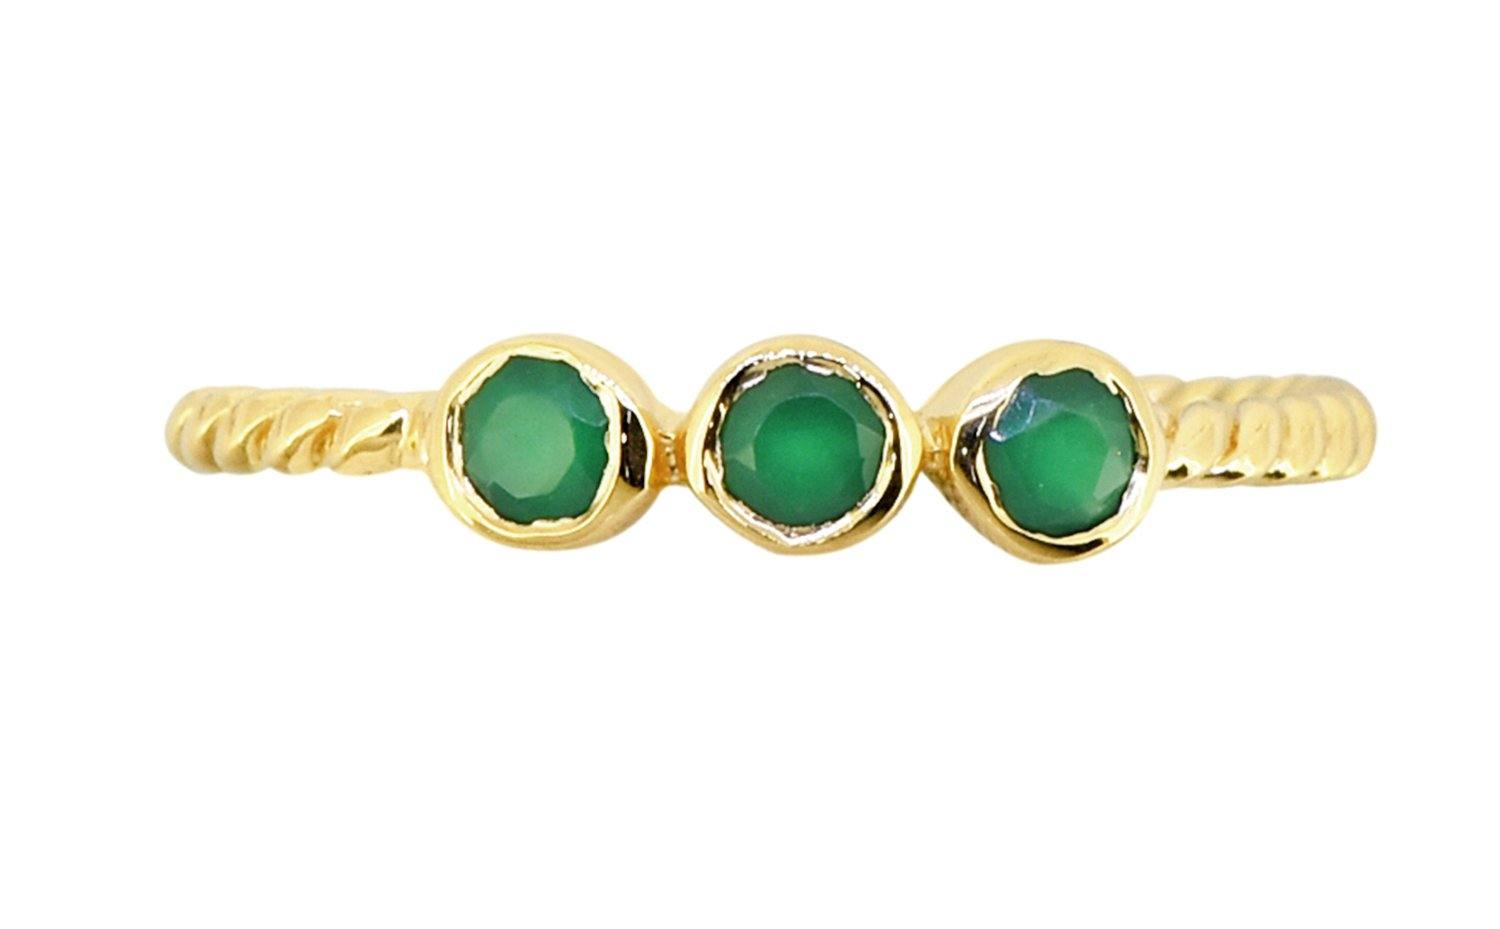 Green Onyx Solid 925 Sterling Silver Gold Plated Ring Genuine Gemstone Jewelry - YoTreasure